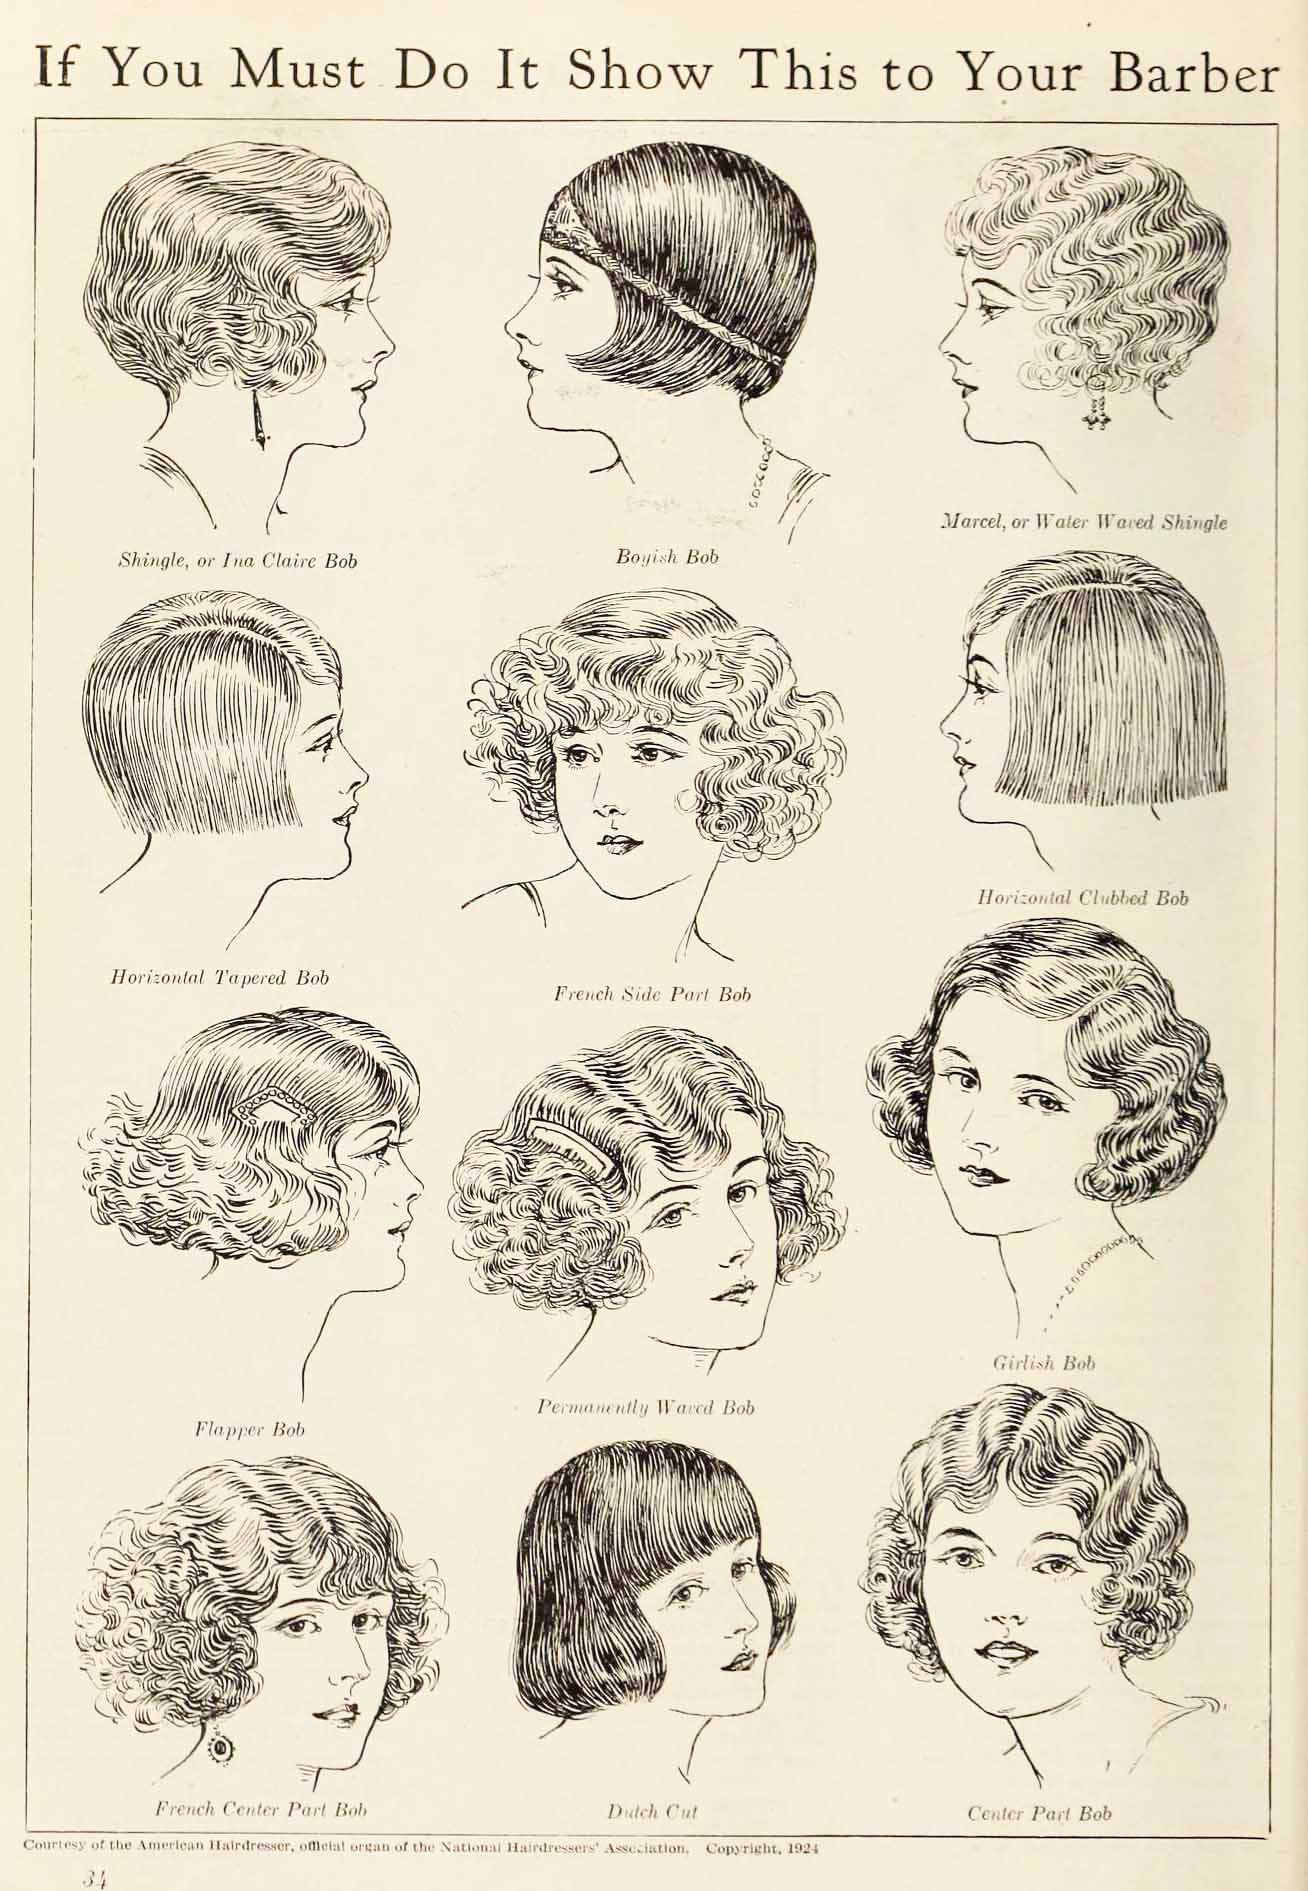 History of Wigs - Who Invented Wigs?